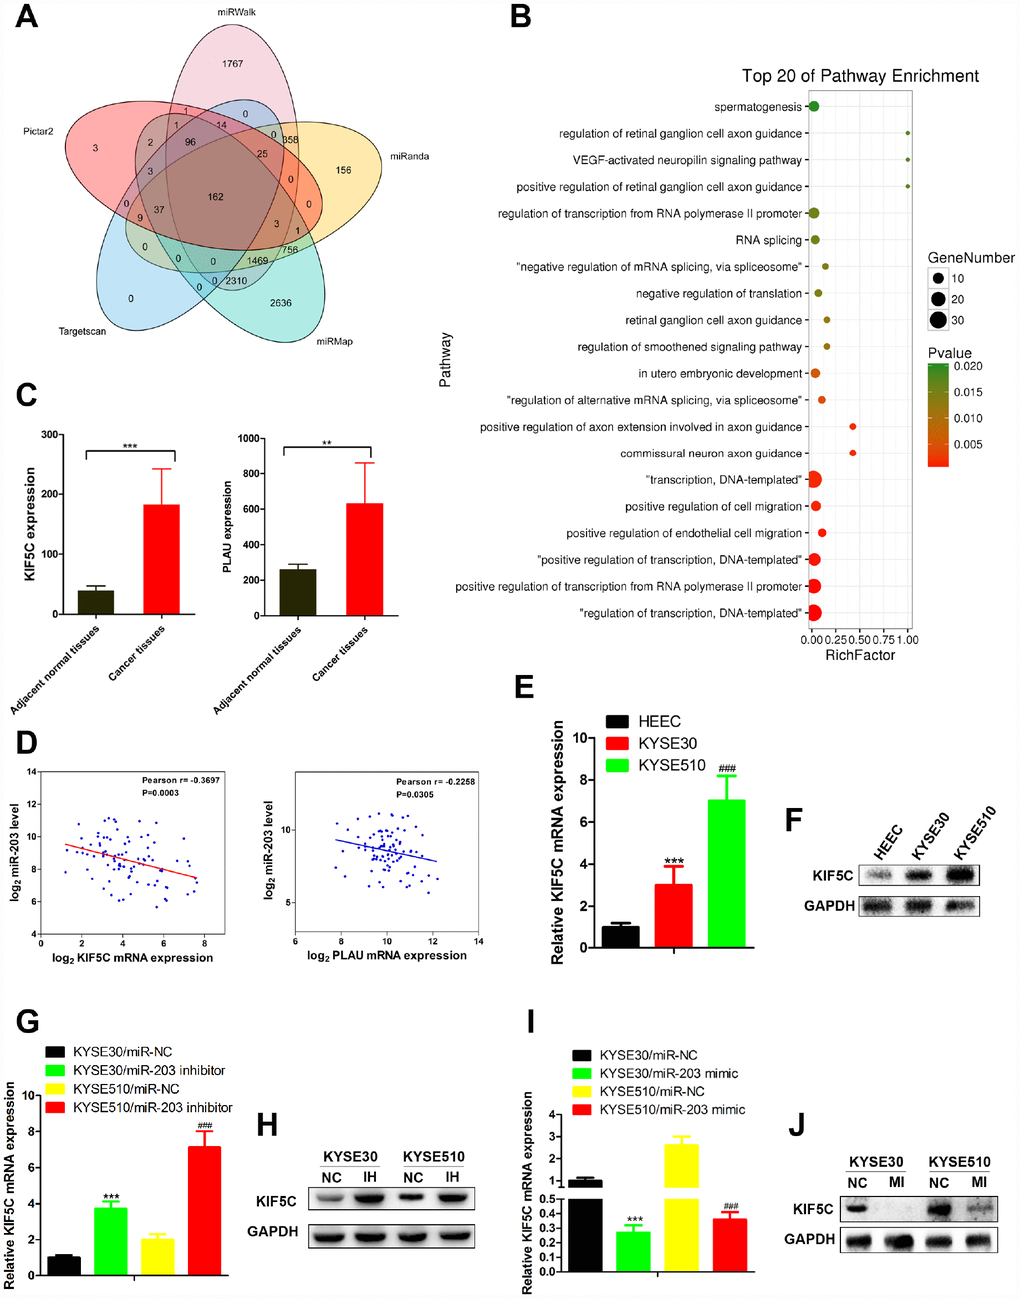 miR-203 inhibits migration and invasion of EC cells through directly targeting KIF5C expression. (A) The targets of miR-203 in EC predicted by TargetScan7.1. (B) Pathway enrichment of 162 potential targets of miR-203. (C) mRNA expression of potential direct targets in tumor tissues and adjacent normal tissues of EC patients was revealed by mRNA-seq provided by TCGA. Data is presented as mean ± SD. ***p D) Scatterplot depicts a significant inverse correlation between miR-203 and KIF5C mRNA expression. KIF5C expression in normal esophageal cell line HEEC and EC cell lines KYSE30 and KYSE510 was determined by qRT-PCR (E) and western blotting (F). GAPDH was used as an internal control. Data is presented as mean ± SD from three independent experiments. ***p ###p G) and protein (H) expression was determined in EC cells. Effect of miR-203 mimics on KIF5C mRNA (I) and protein (J) expression was determined in EC cells. Data is displayed as the Mean ± SD of three independent experiments. ***p ###p 